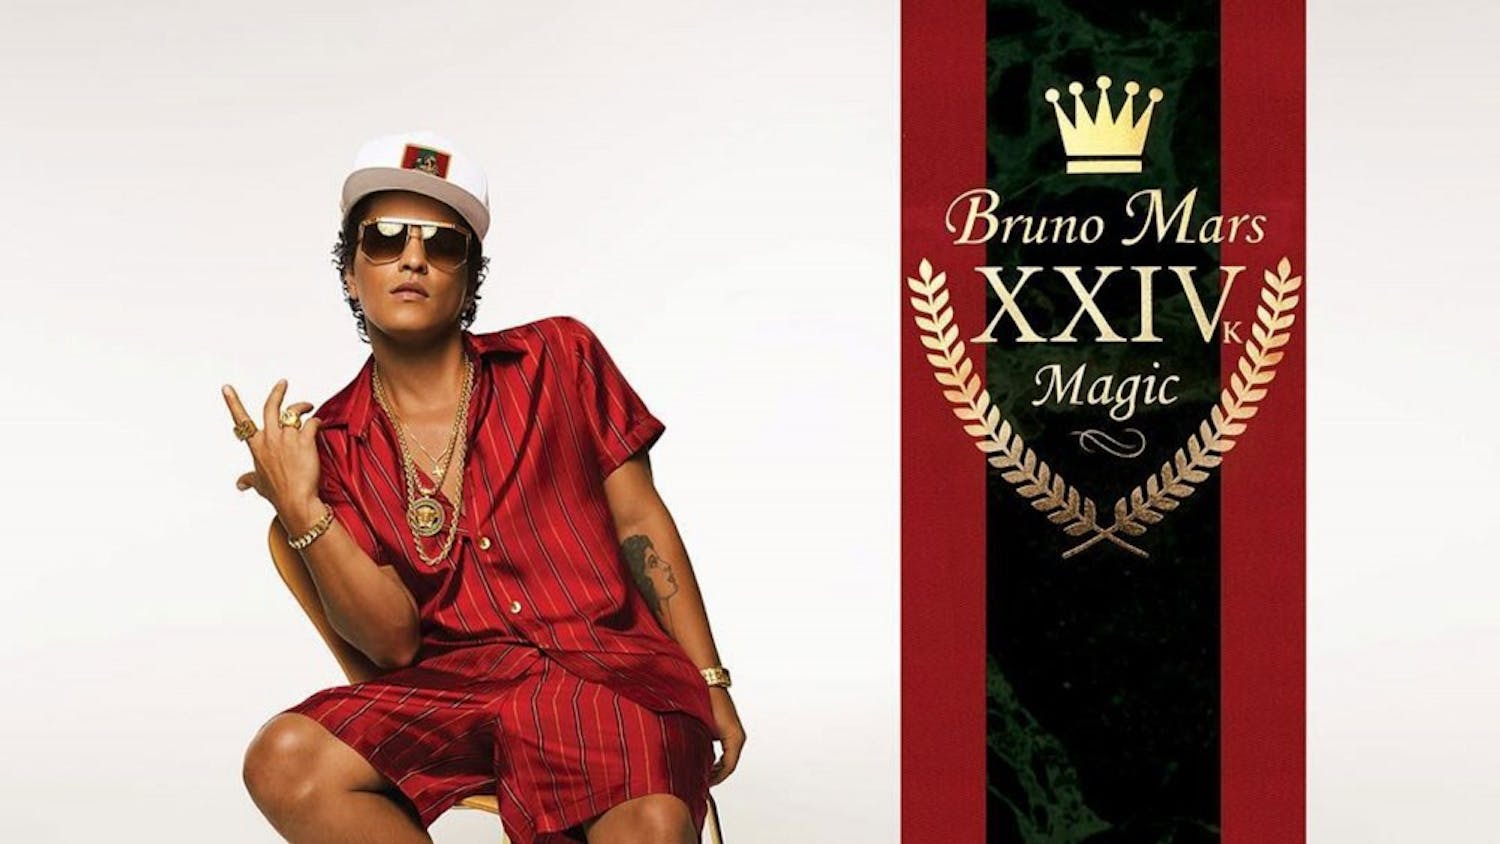 Bruno Mars "24k Magic" was released on Nov. 18. The album shows a new side of Mars with heavy funk influence and&nbsp;a more soulful sound.&nbsp;